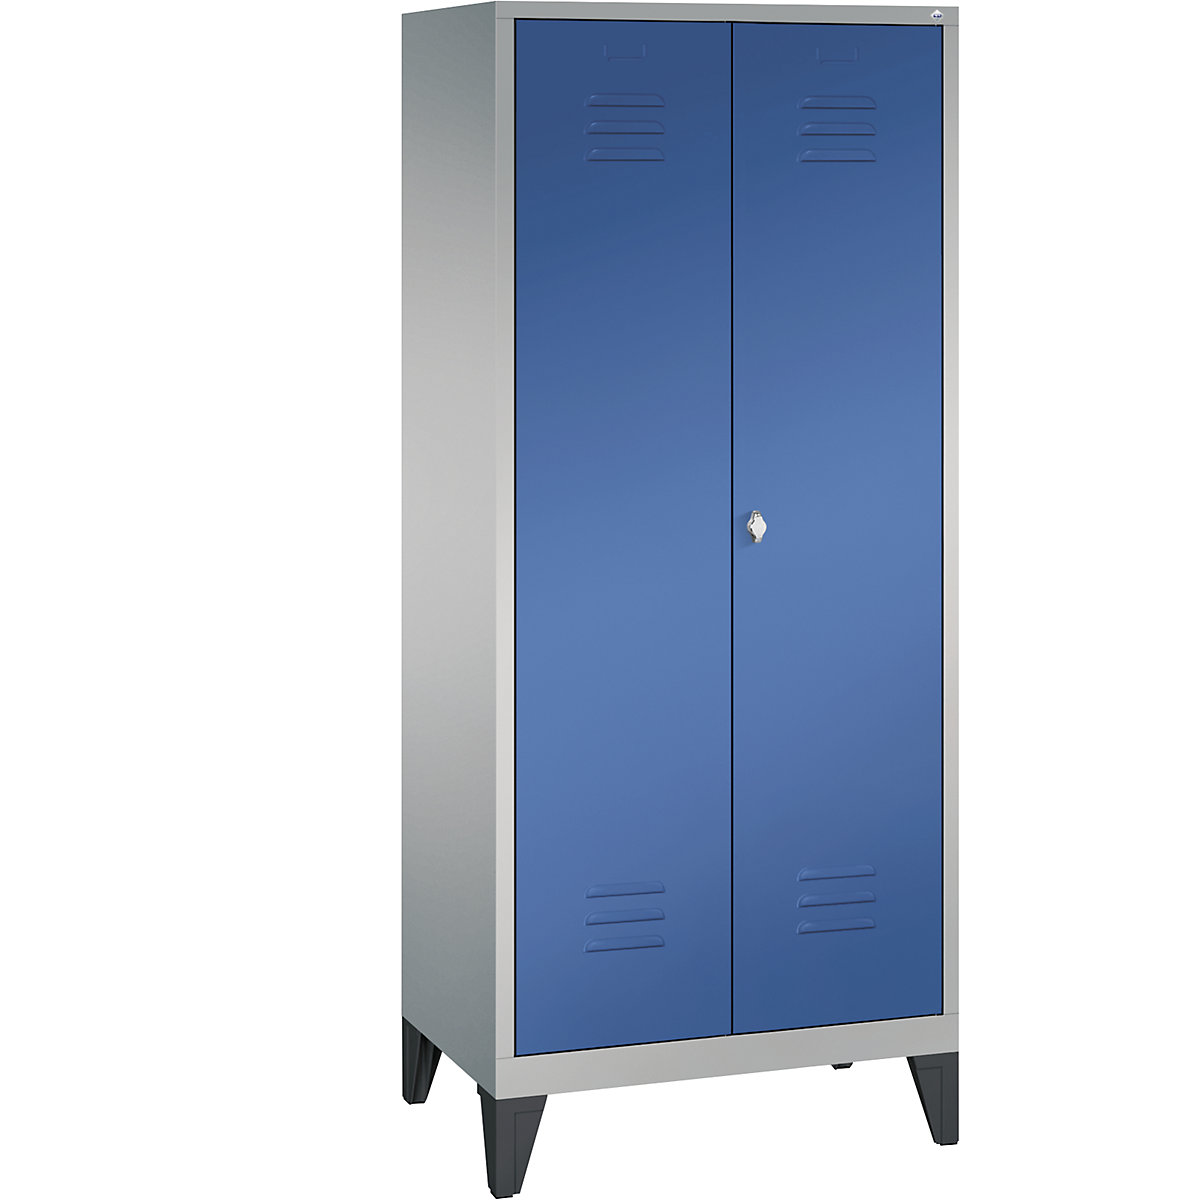 CLASSIC storage cupboard with feet, doors close in the middle – C+P, 2 compartments, compartment width 400 mm, white aluminium / gentian blue-13